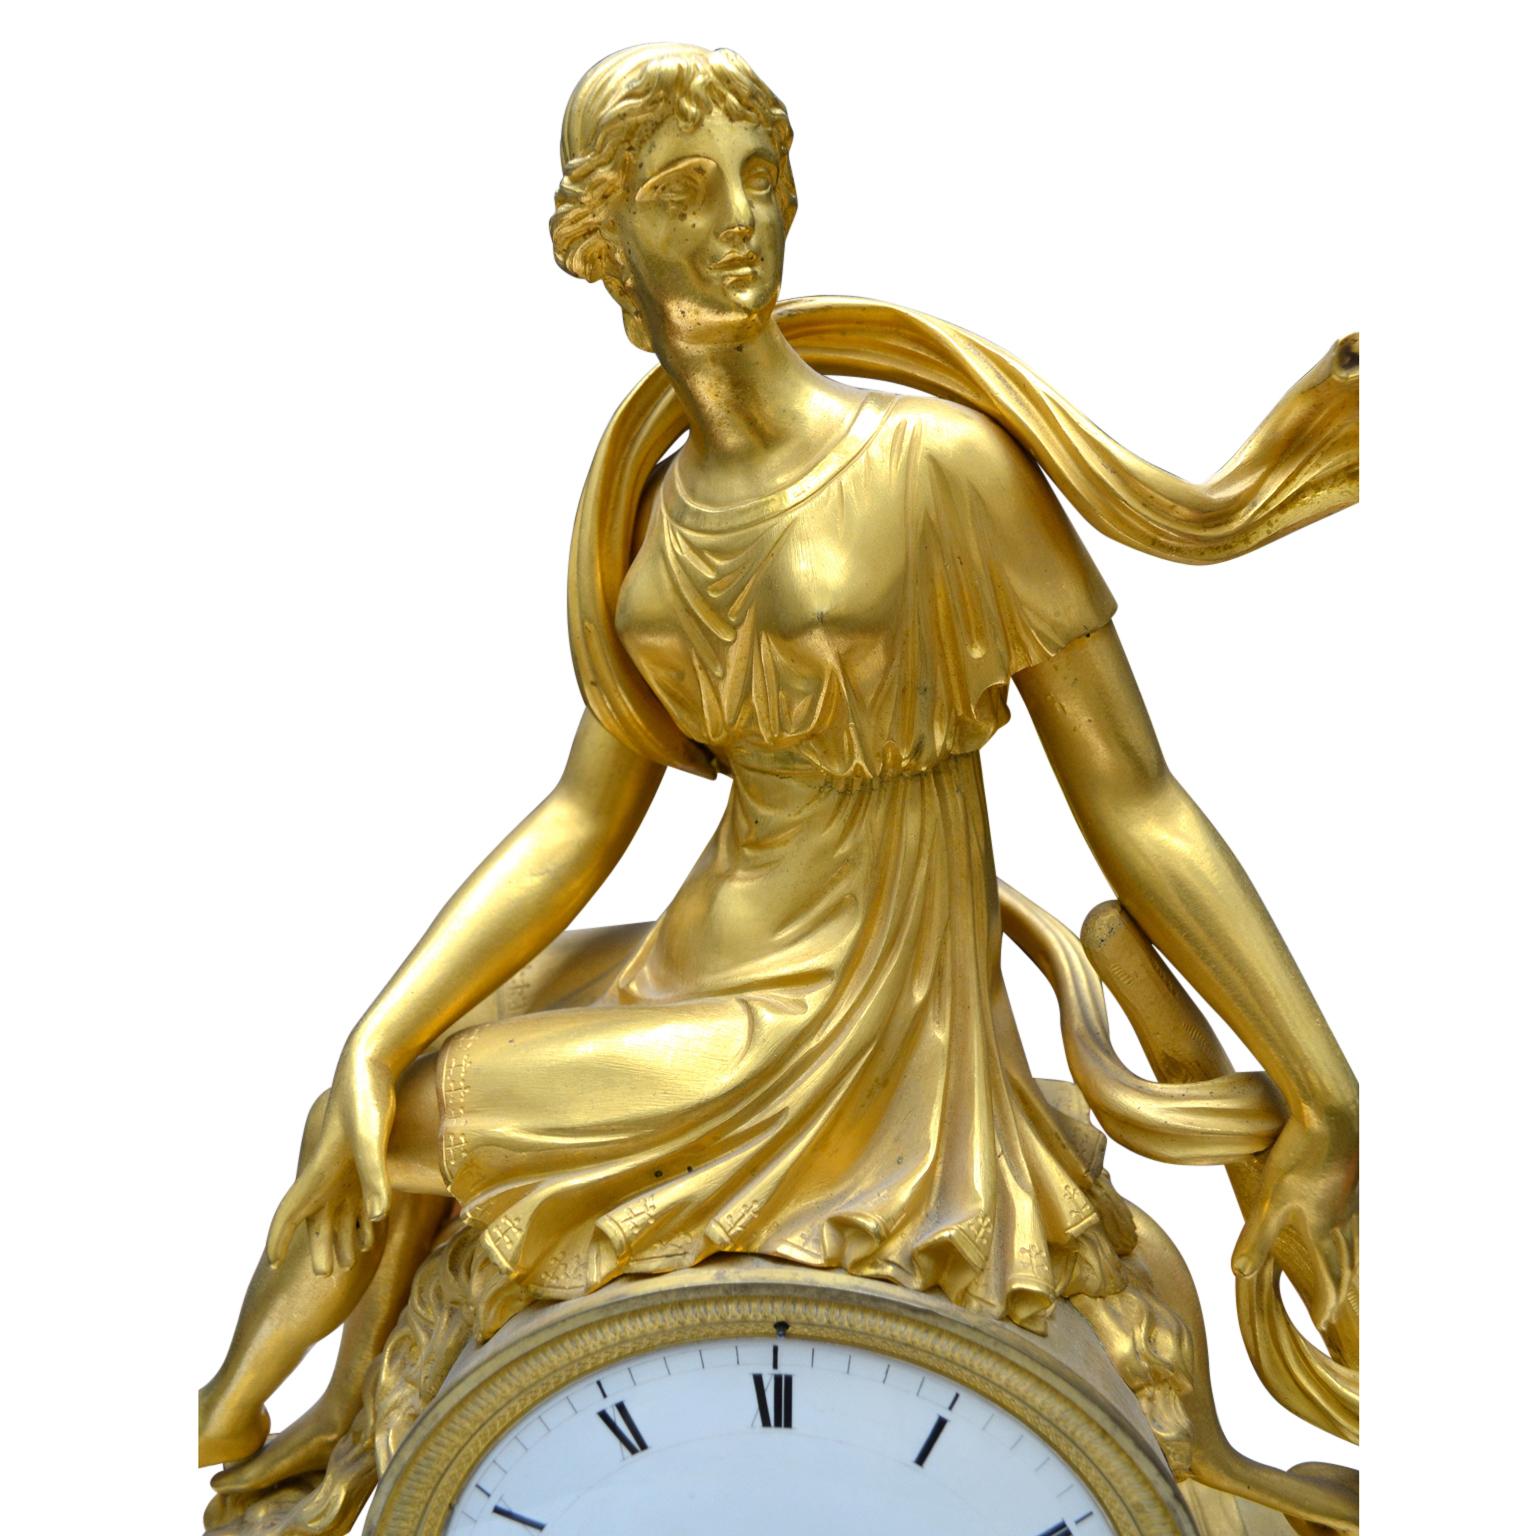  French Empire Gilt Bronze Clock Depicting the Lydian Queen Omphale For Sale 3